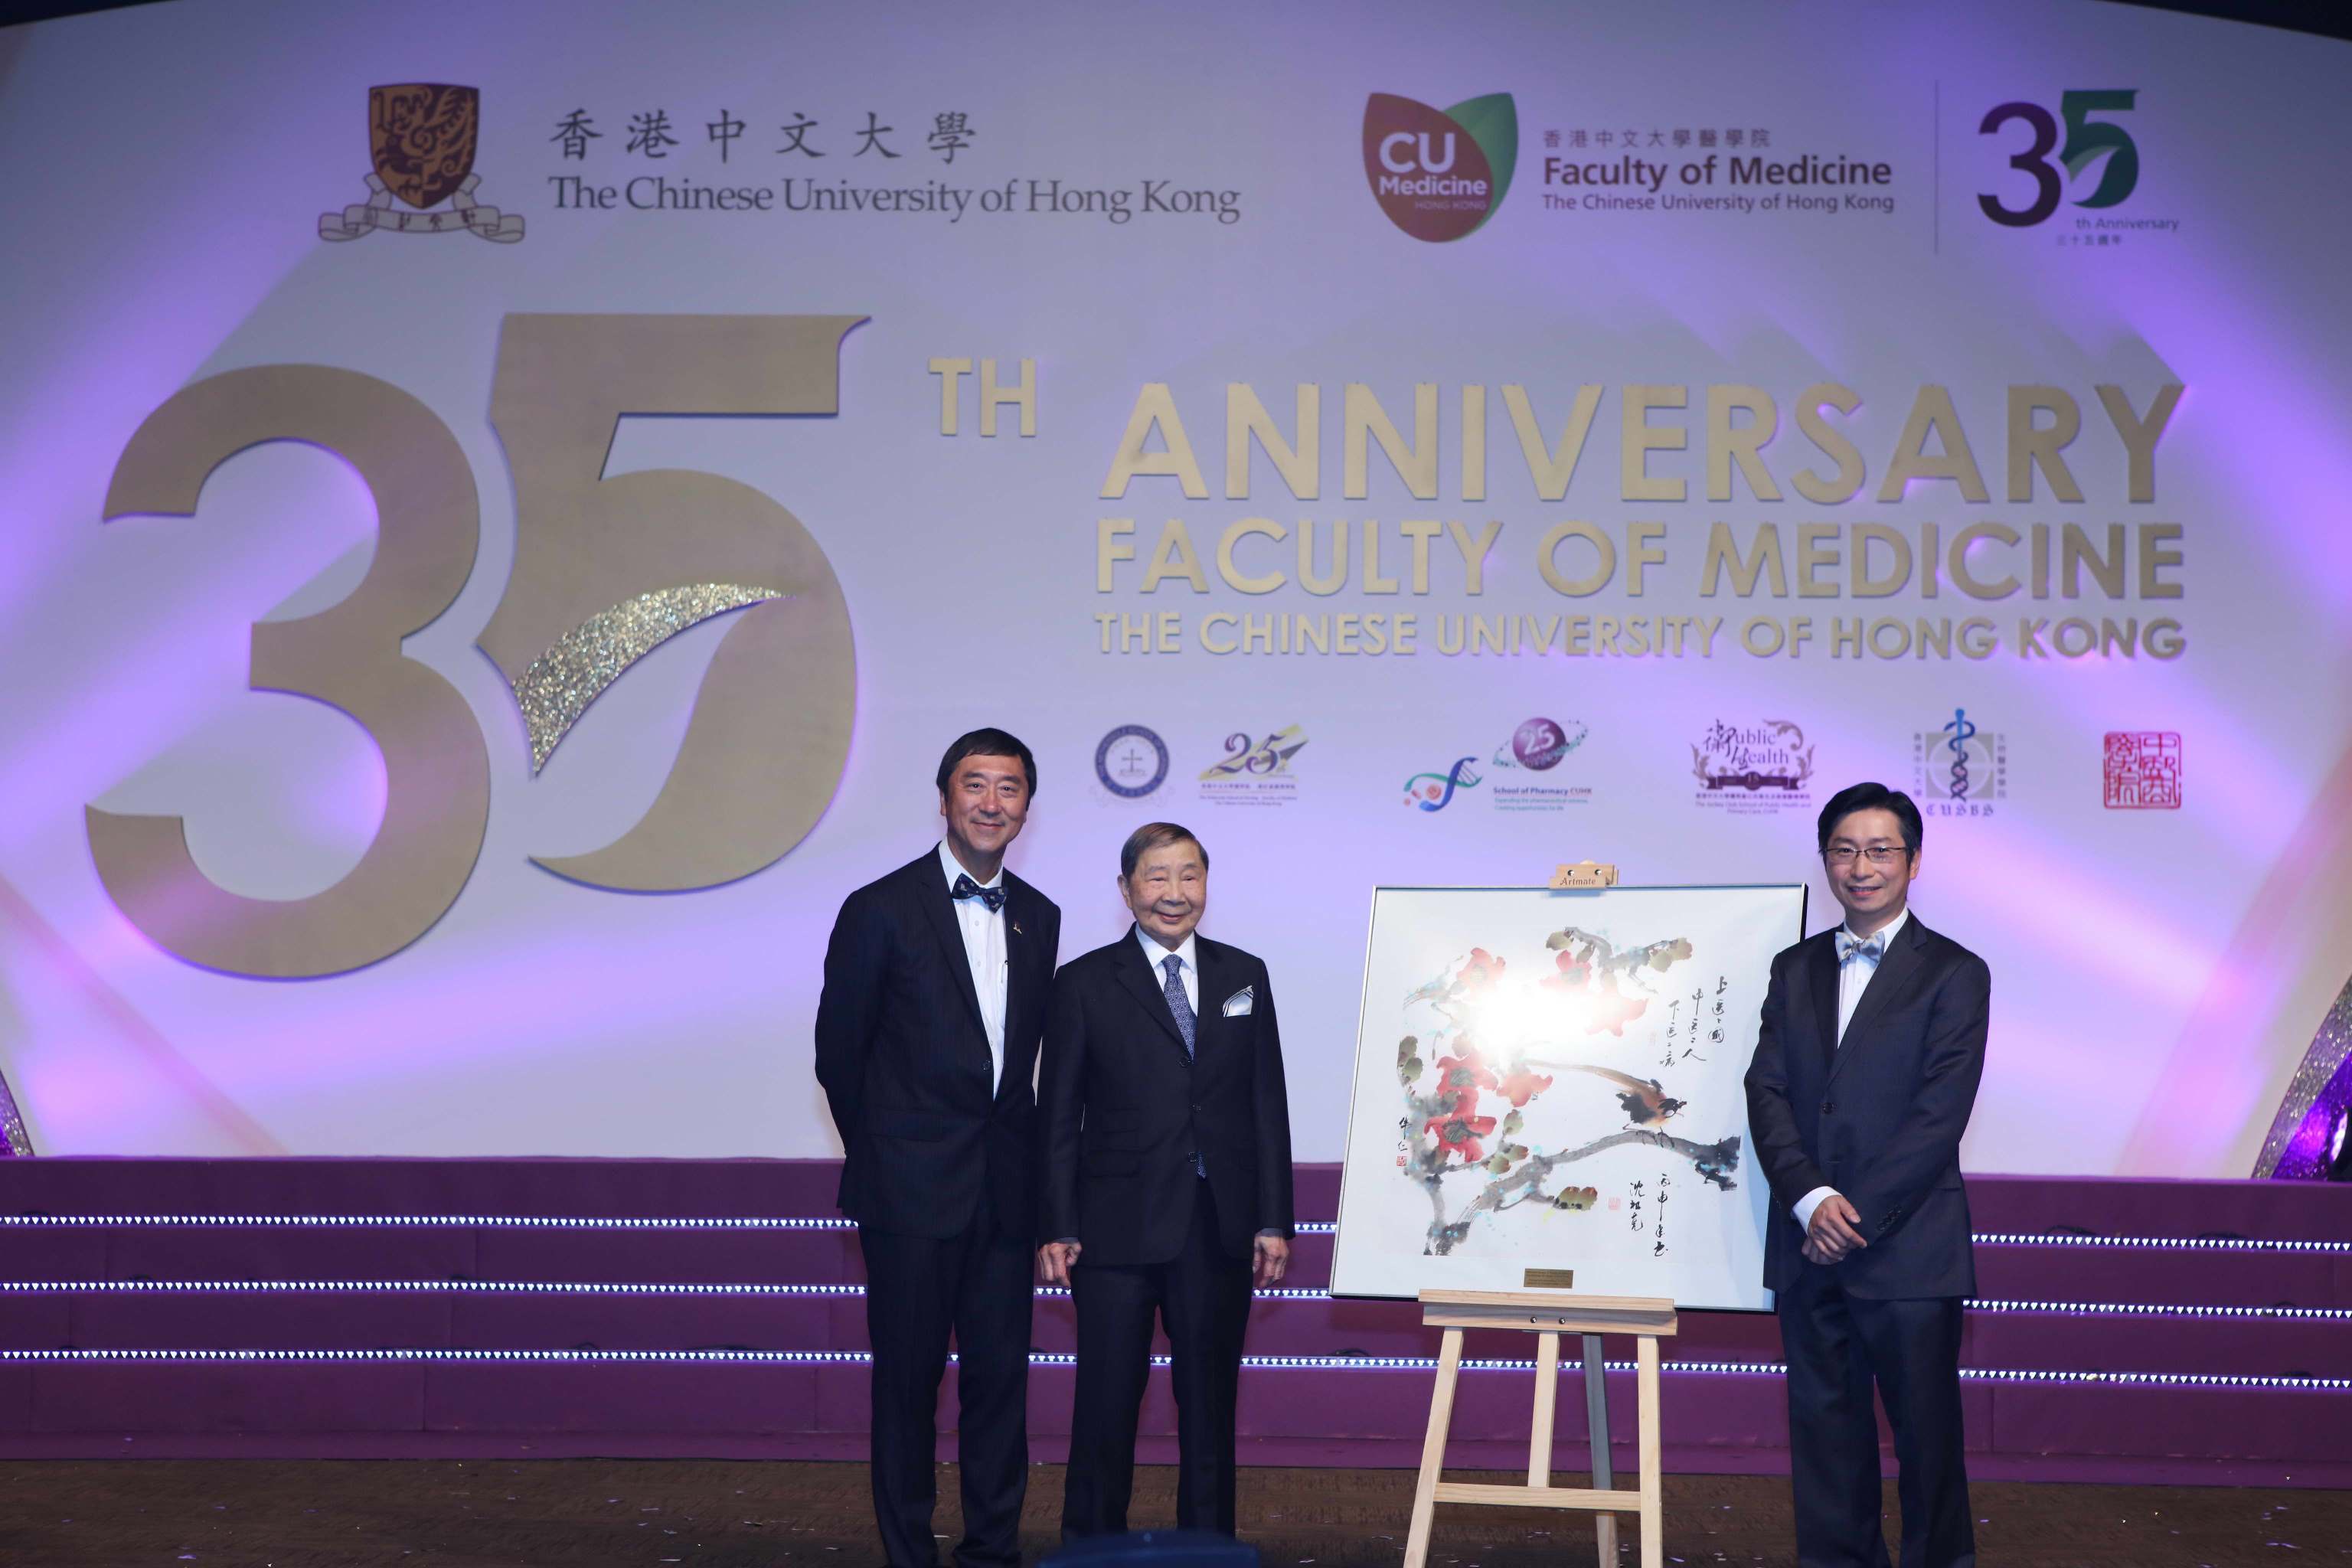 Centre) Mr. Charlie LEE, Chairman of The Charlie Lee Charitable Foundation bided a traditional Chinese flowers-and-birds painting at HKD 360,000. The painting was drawn by Prof. Philip CHIU (right), Professor of the Department of Surgery and Assistant Dean (External Affairs) of the Faculty, with calligraphy from the hand of Vice-Chancellor Prof. Joseph SUNG.